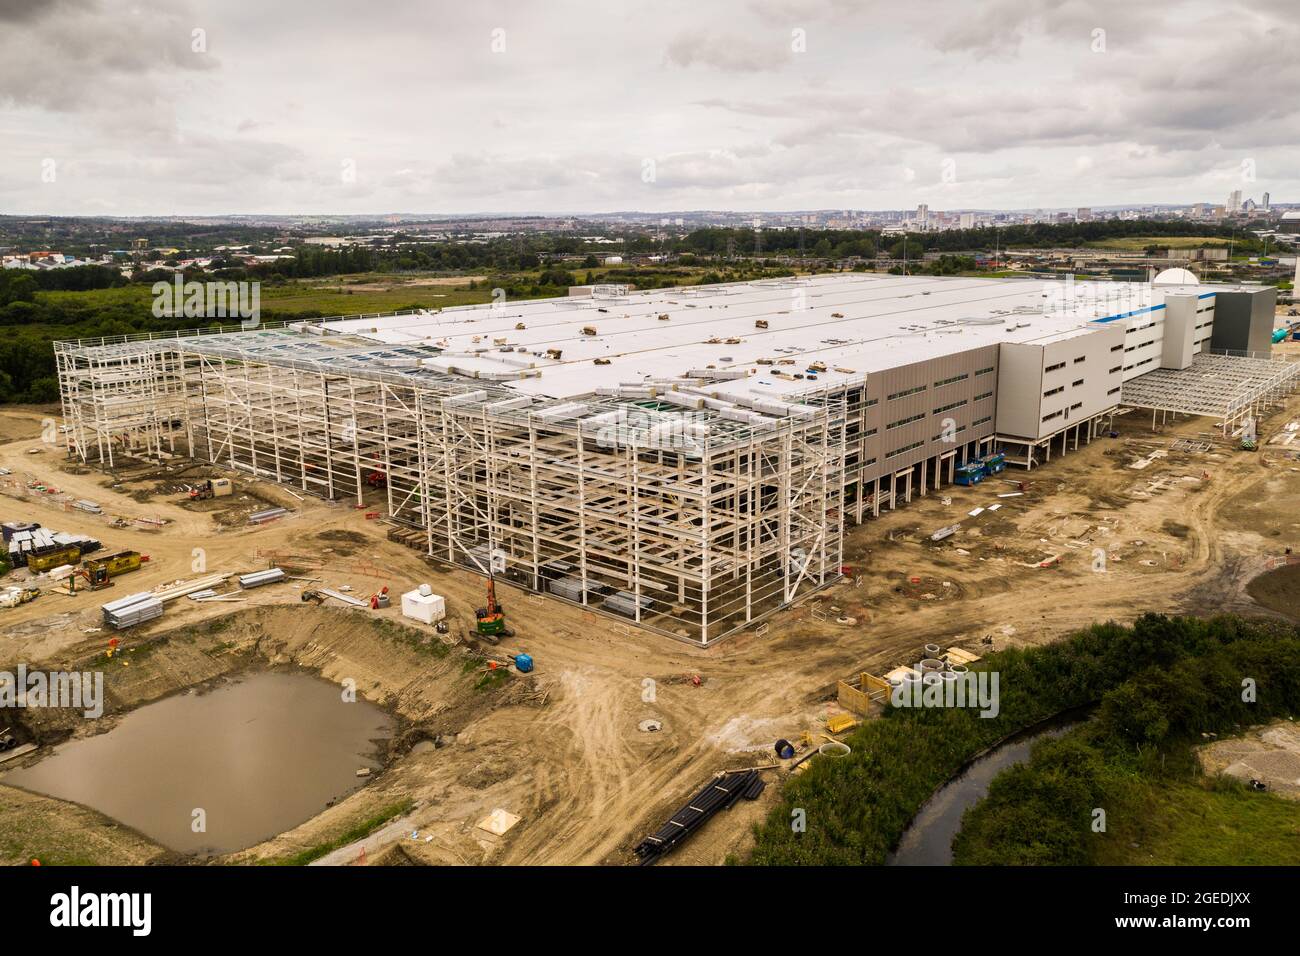 Aerial view of a large distribution centre warehouse on the outskirts of a large city being built and under construction Stock Photo